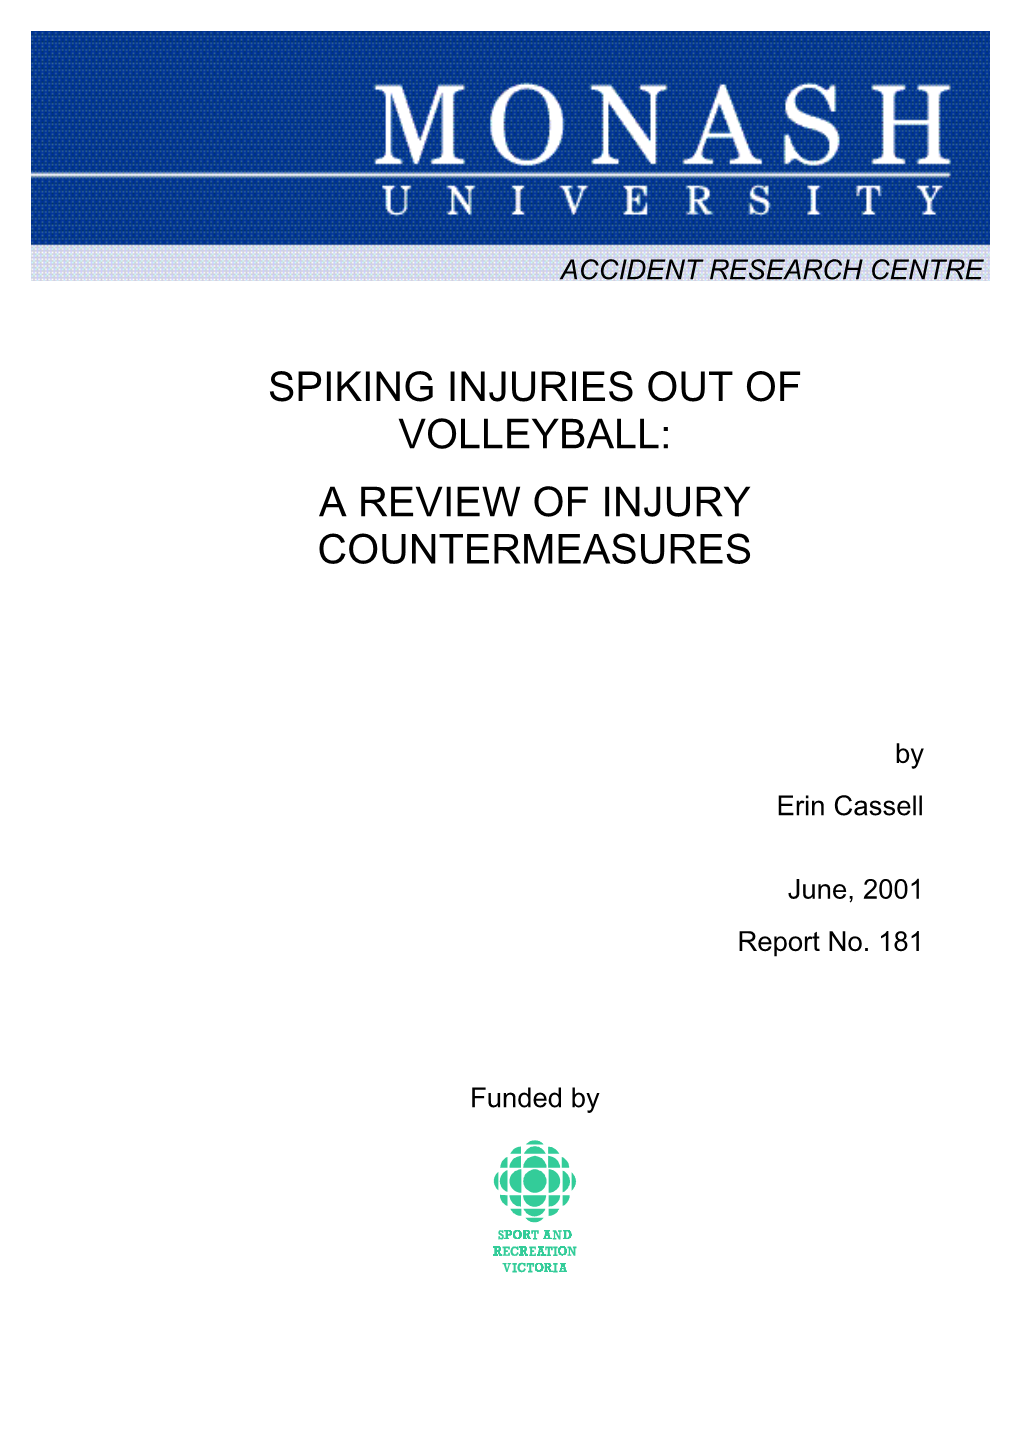 Spiking Injuries out of Volleyball: a Review of Injury Countermeasures